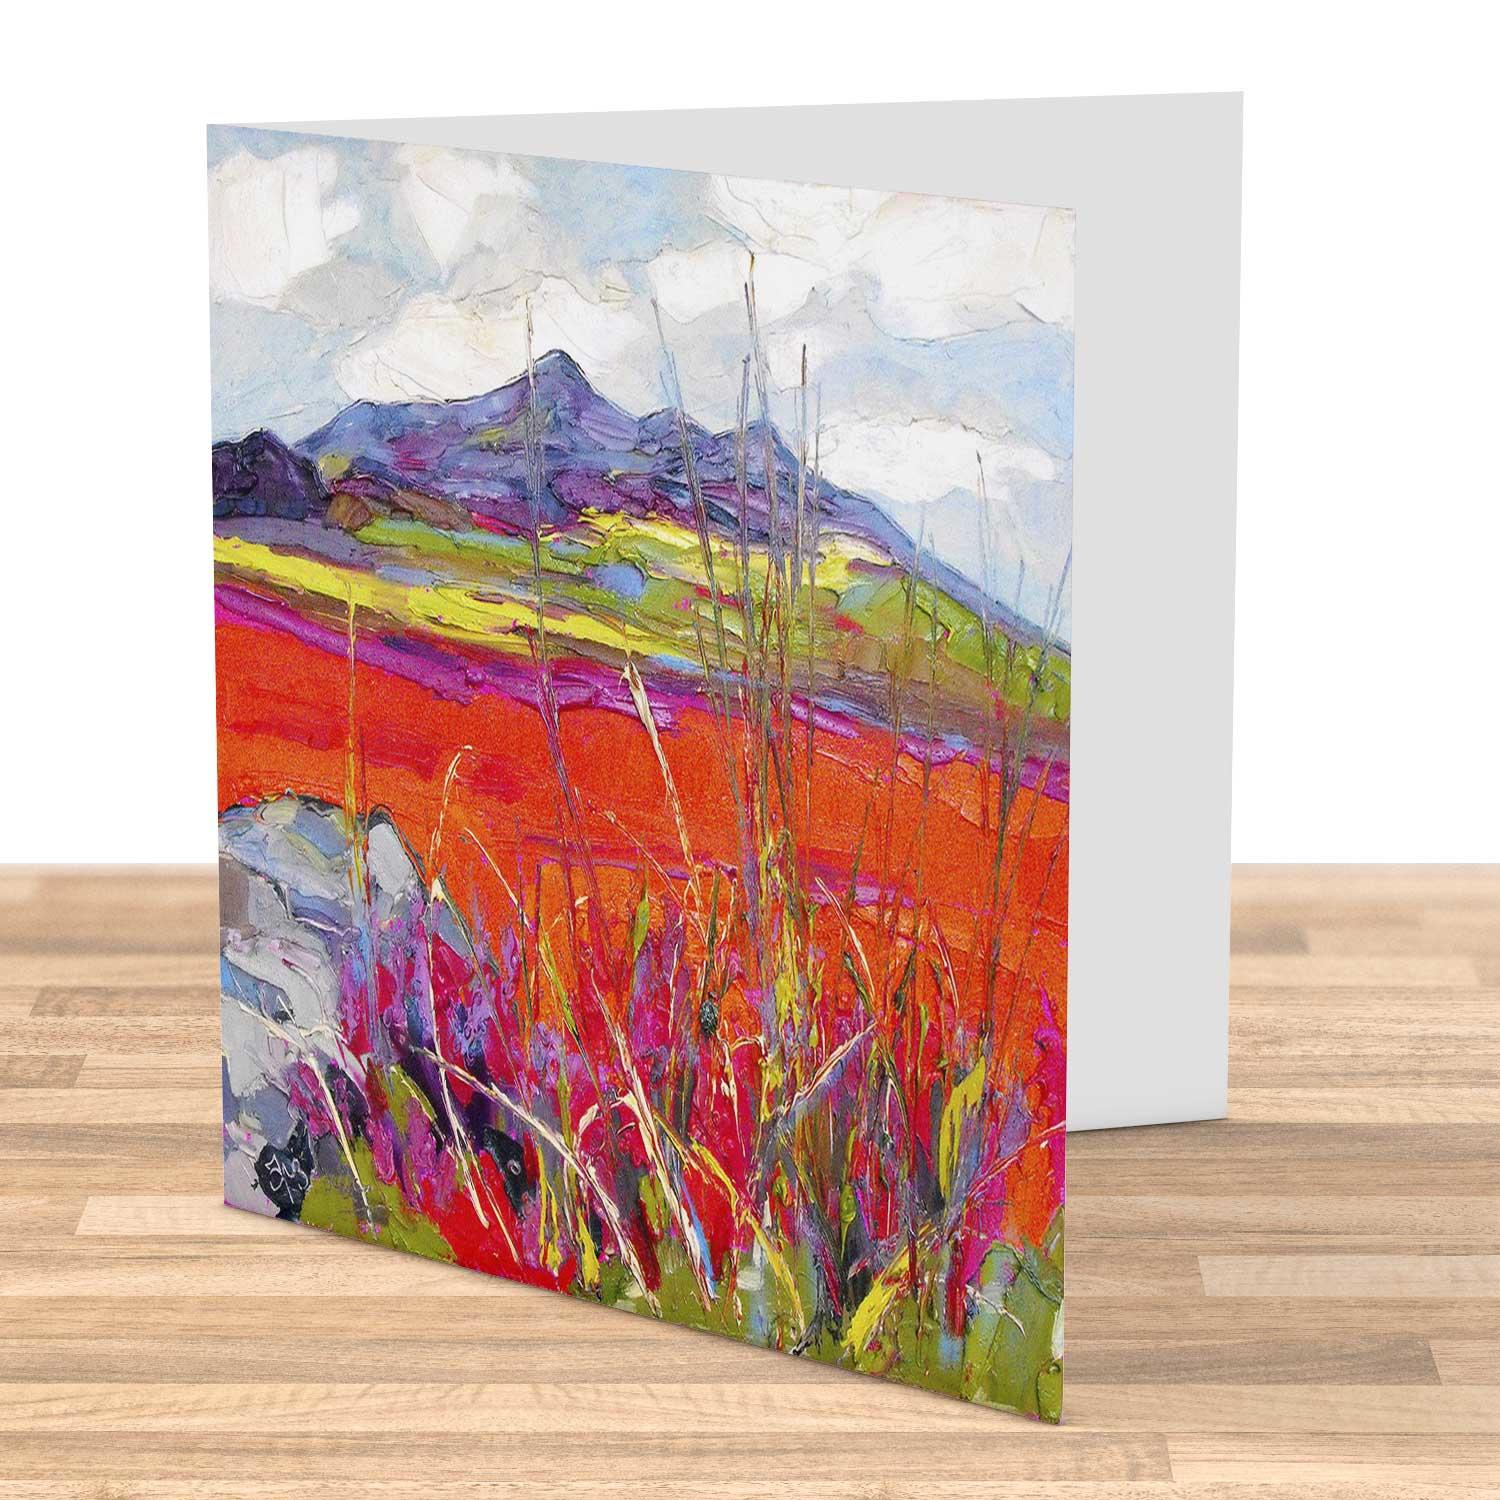 Pale Sky, the Cuillins Greeting Card from an original painting by artist Judith I Bridgland